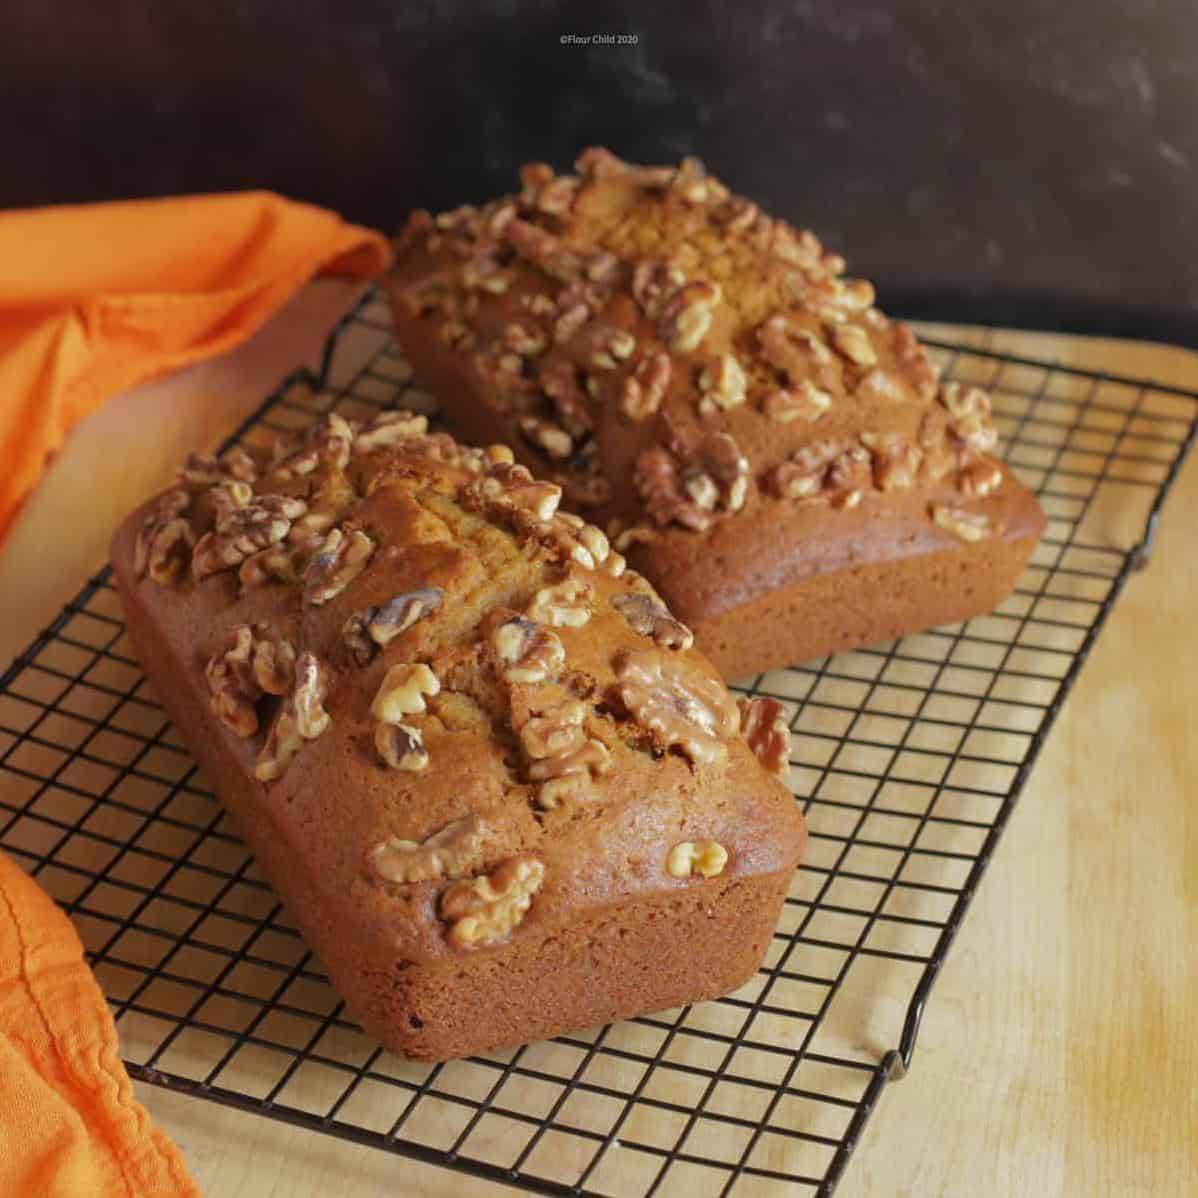  Warm slices of freshly baked pumpkin bread ready to be enjoyed with a cup of tea or coffee.